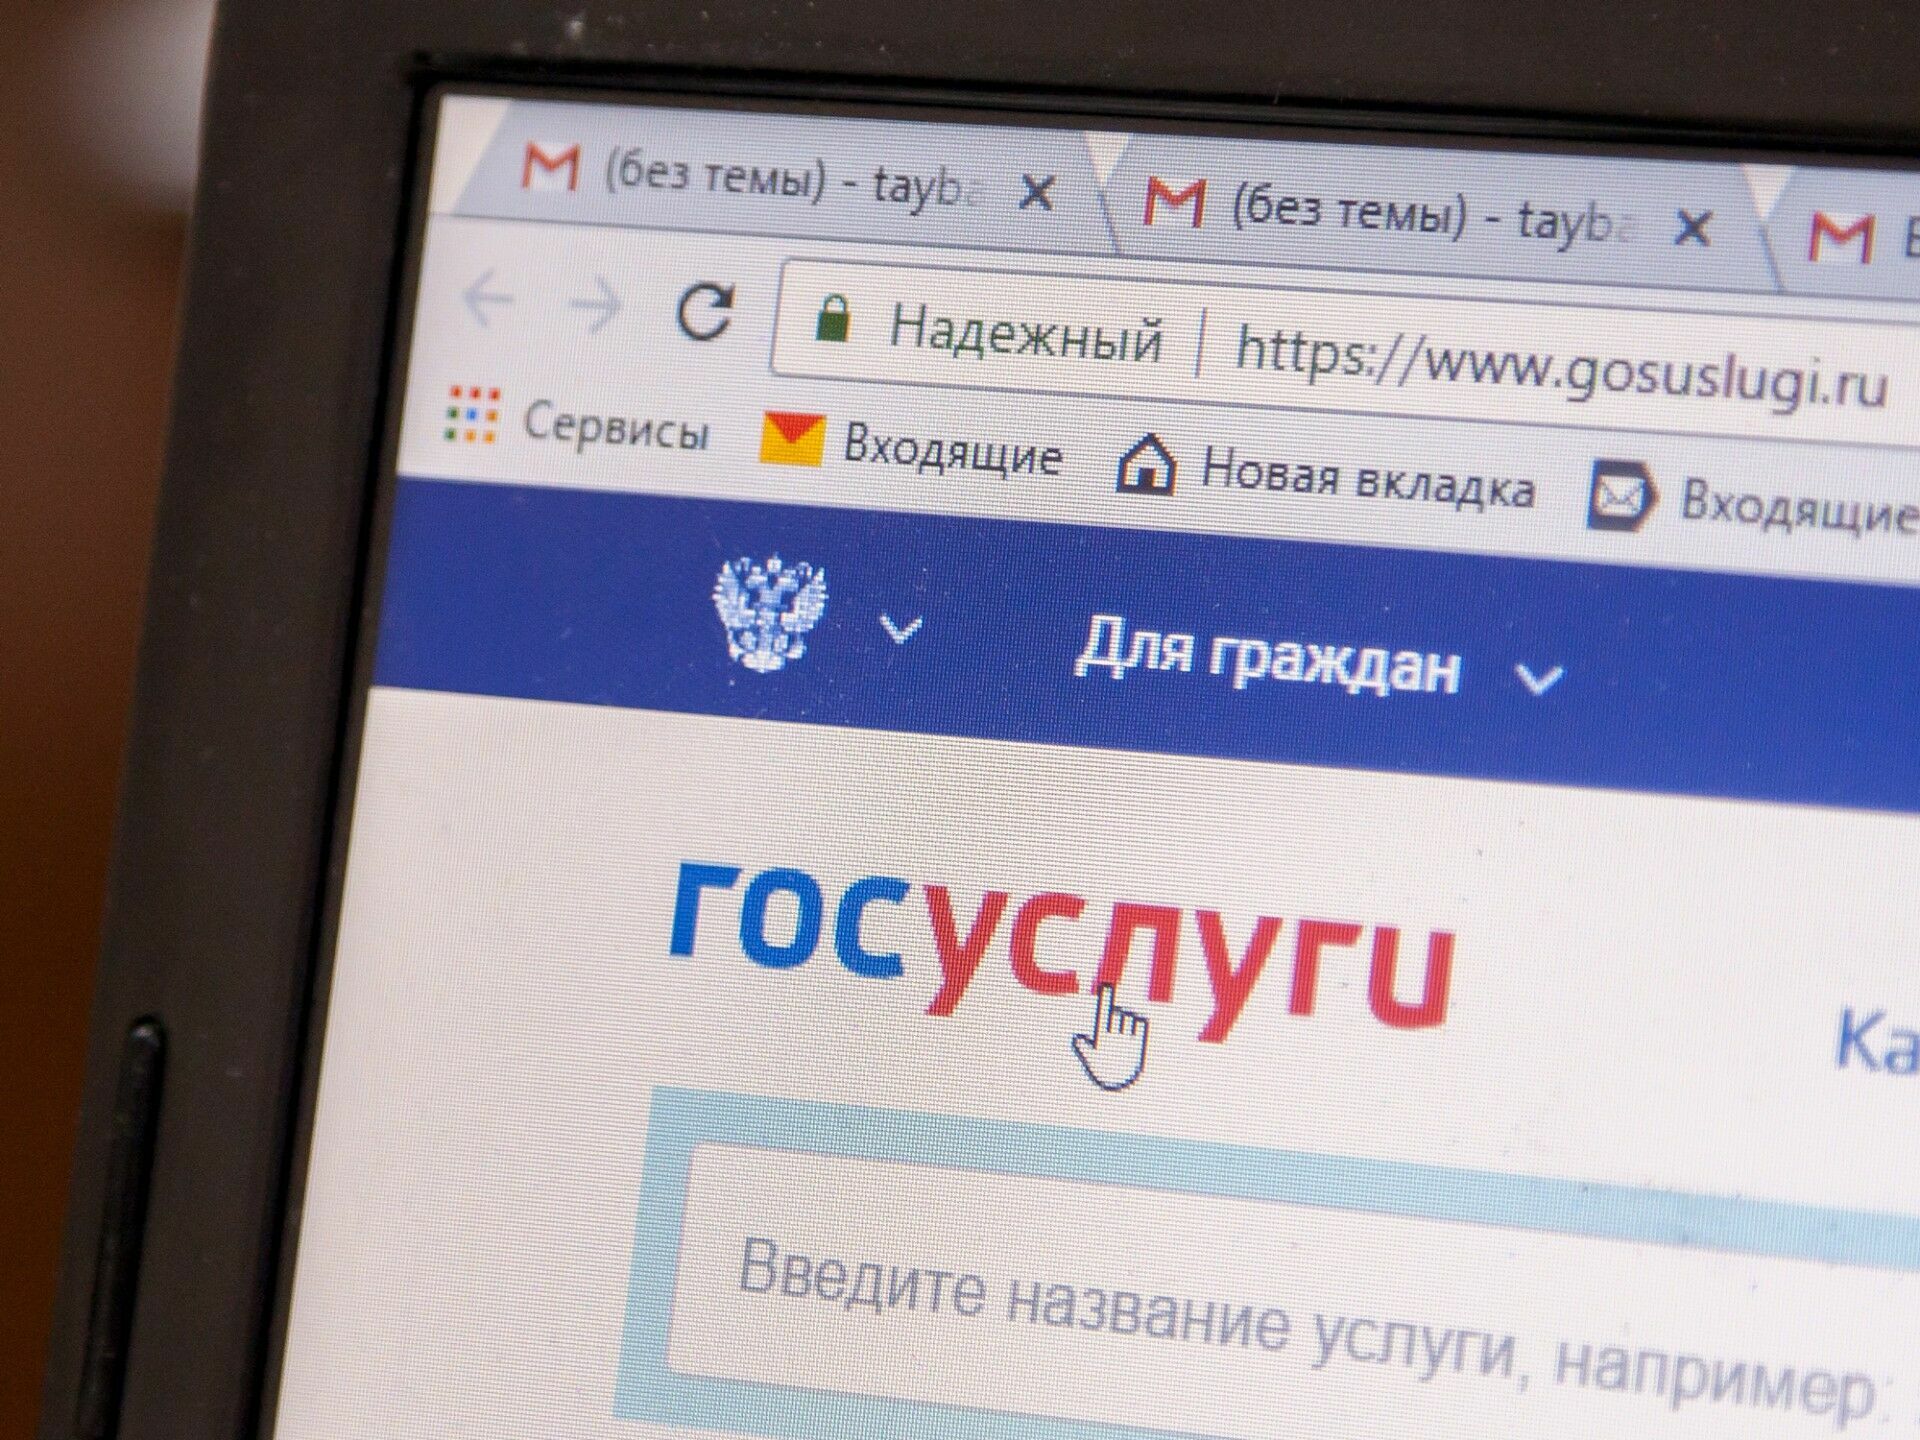 Connection to the website of the Gosuslugi from 2022 will be possible only by SMS